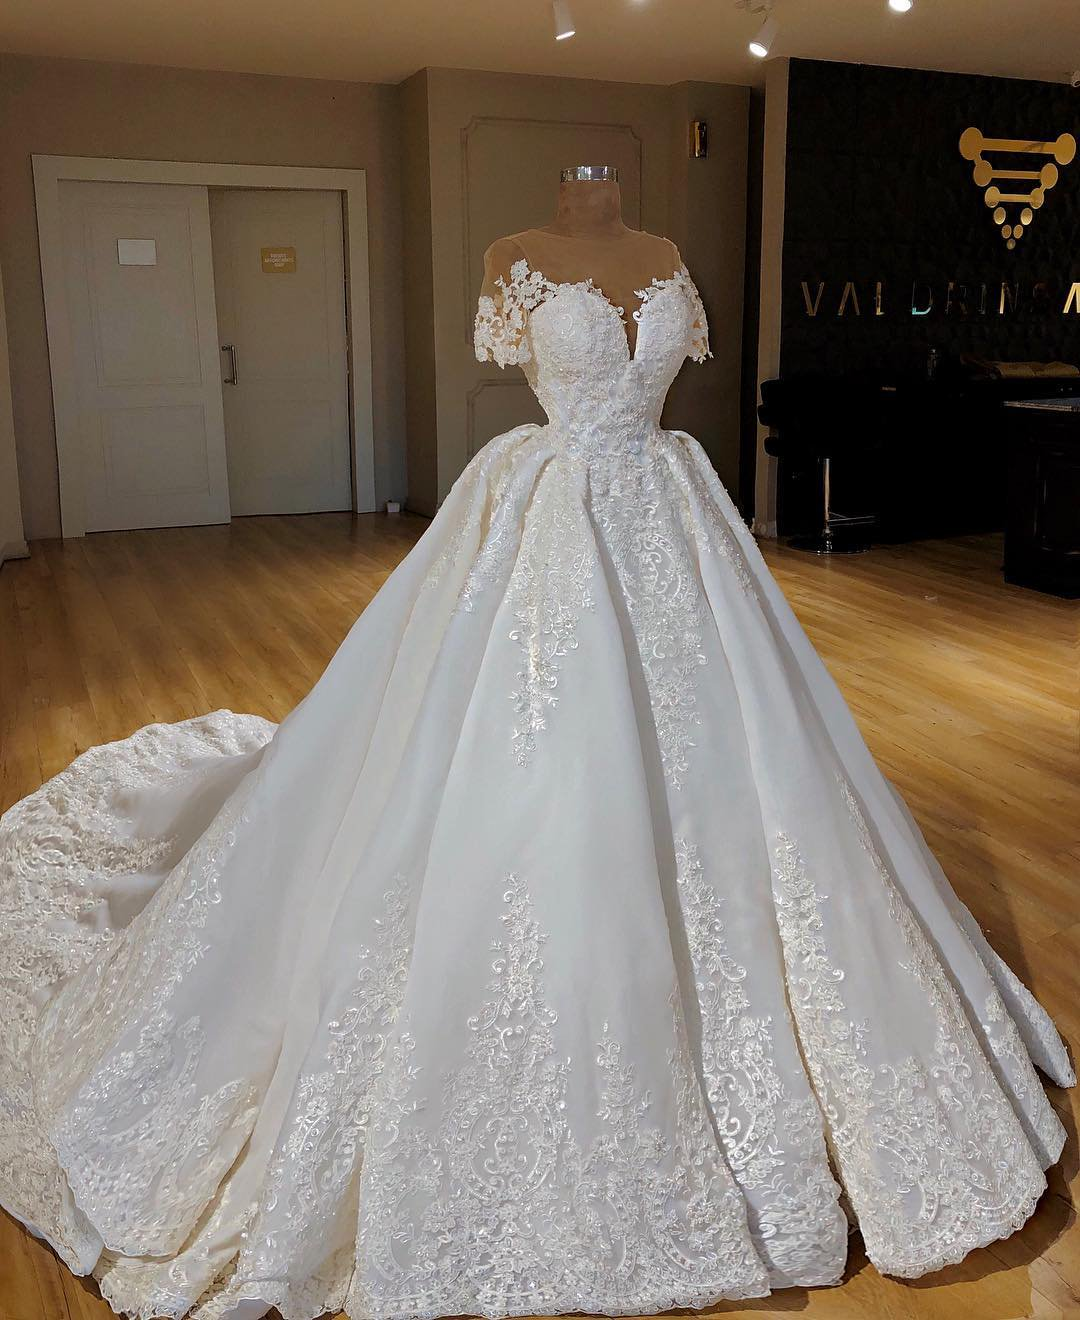 Elegant Jewel Shortsleeves A-line Wedding Dresses White Ruffles Lace Bridal Gowns With Appliques On Sale-27dress